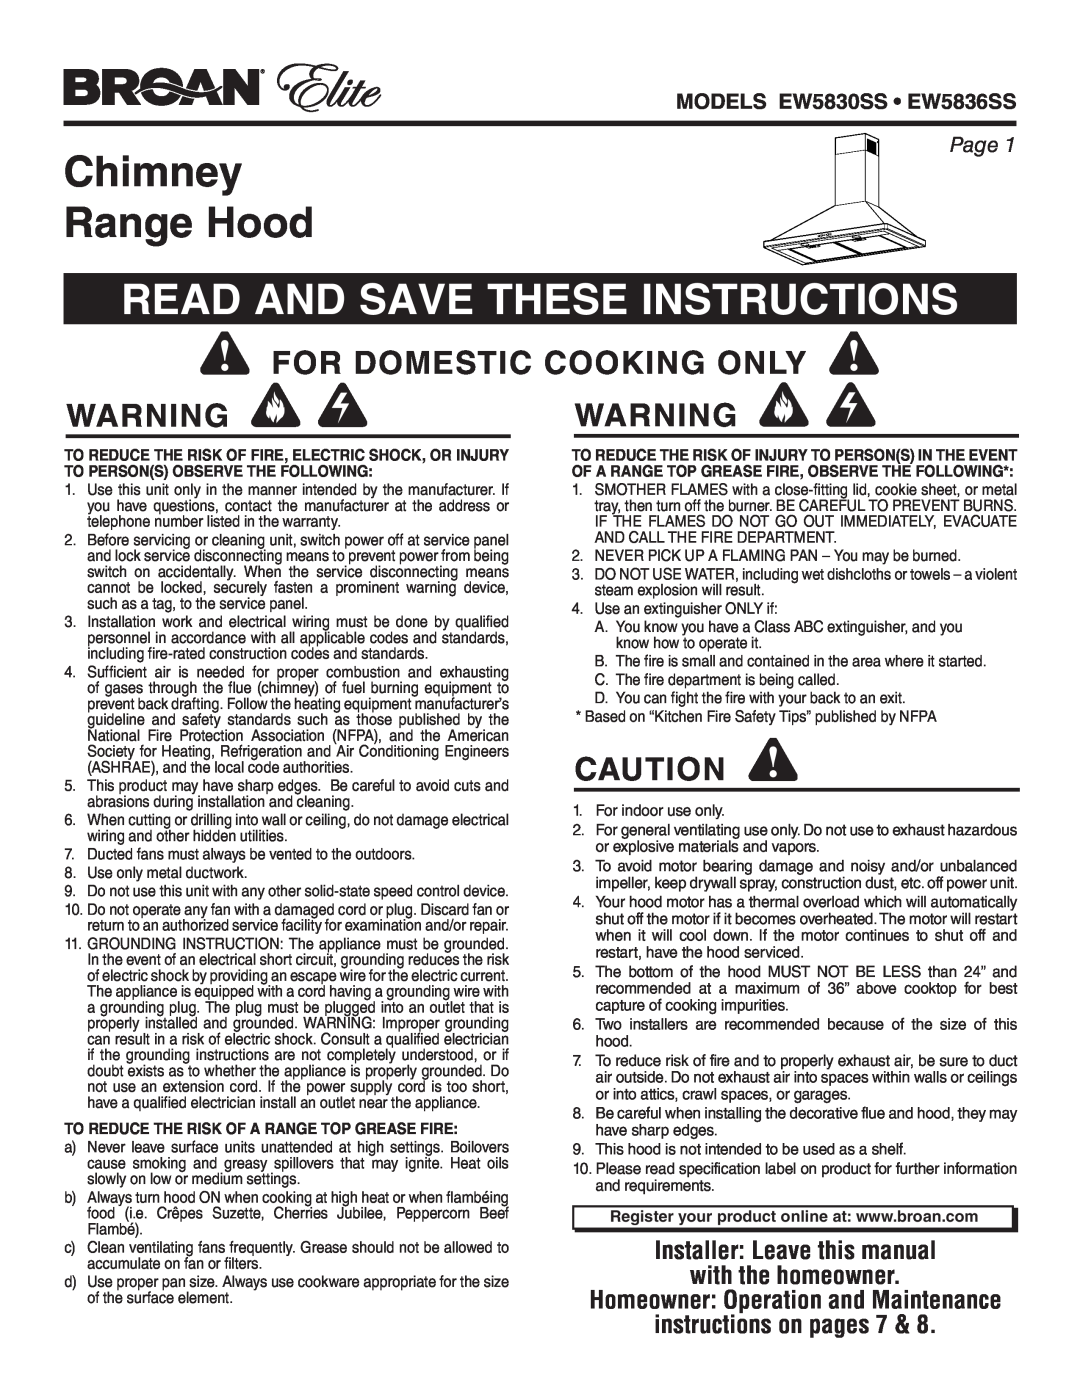 Broan EW5830SS warranty Chimney Range Hood, Read And Save These Instructions, For Domestic Cooking Only Warning Warning 